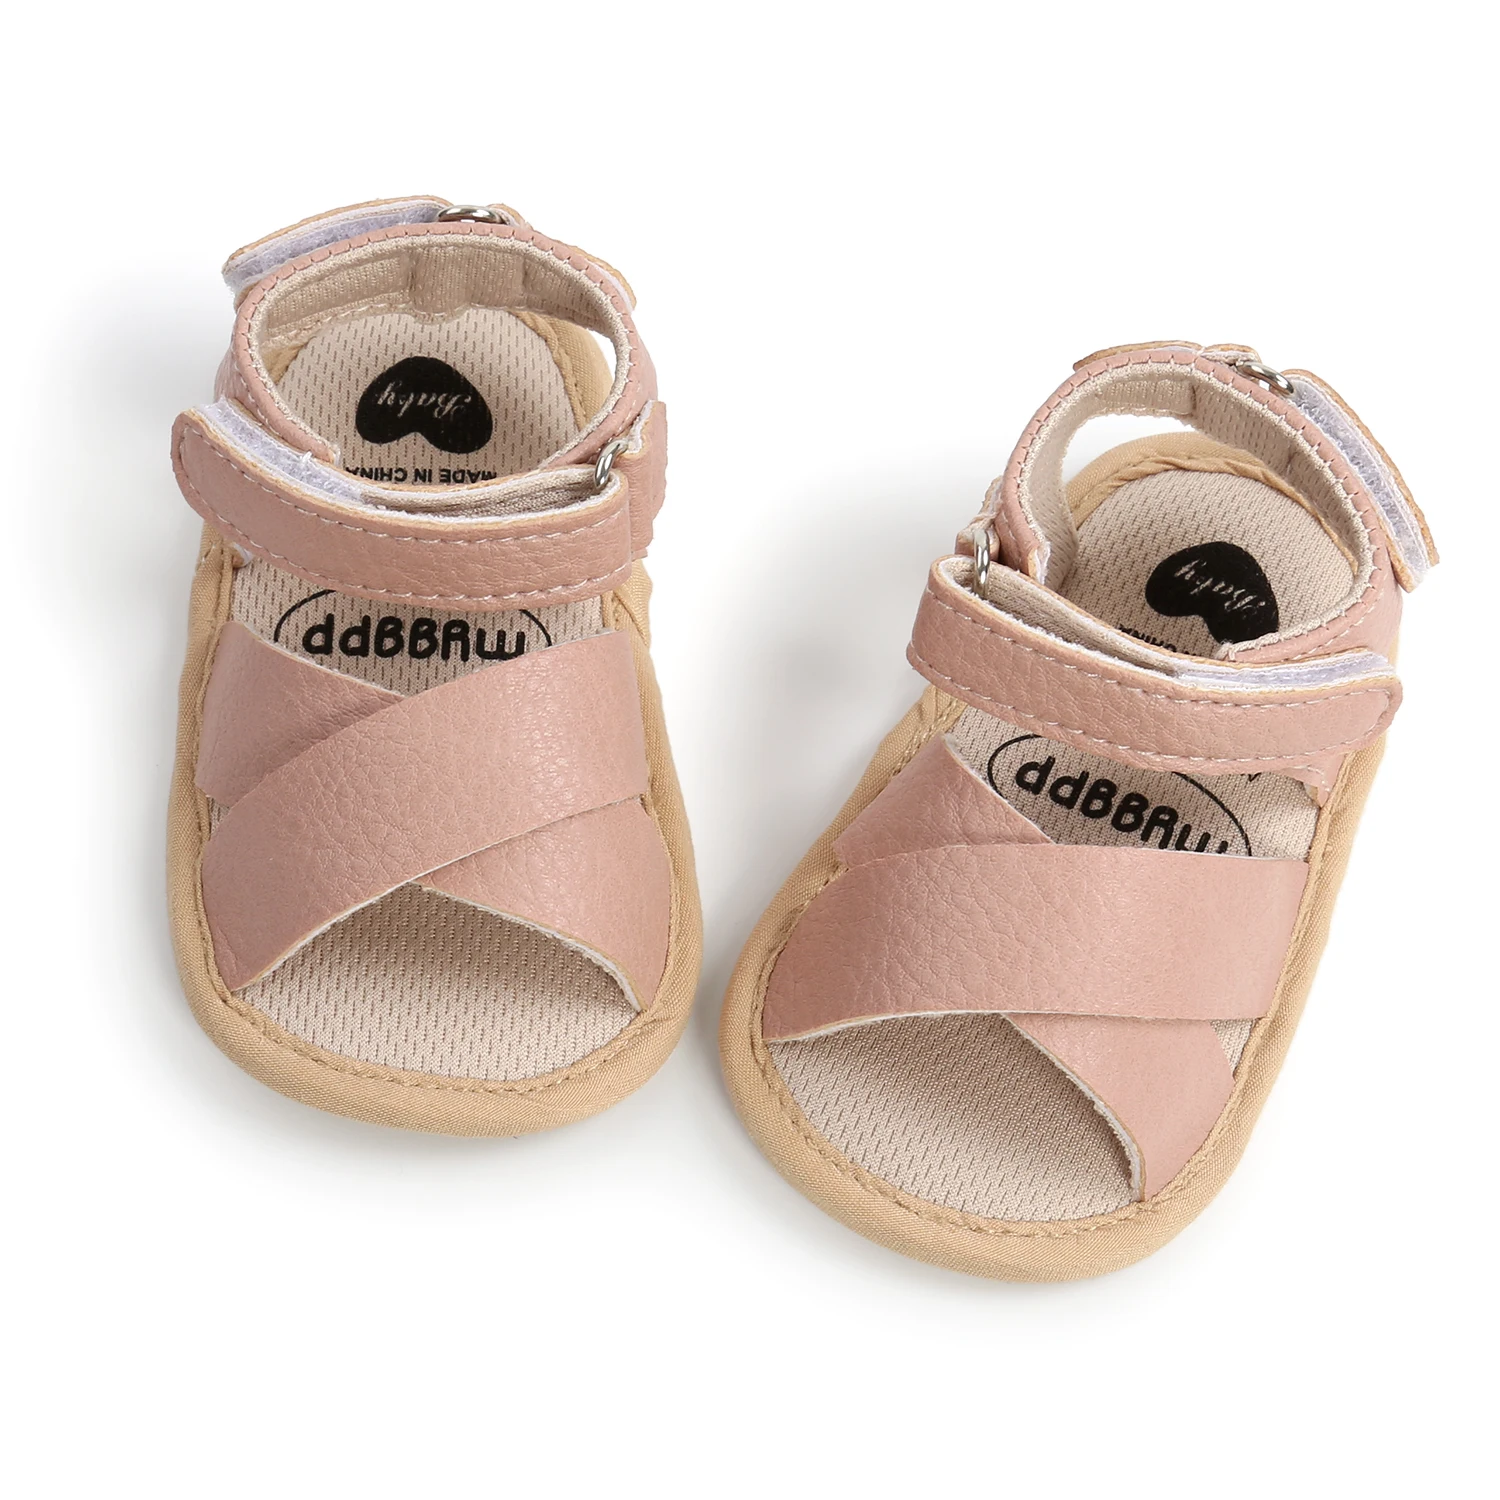 Hot selling Rubber sole footgrip fashion lovely baby girl sandals&slippers infant Baby shoes for summer wearing